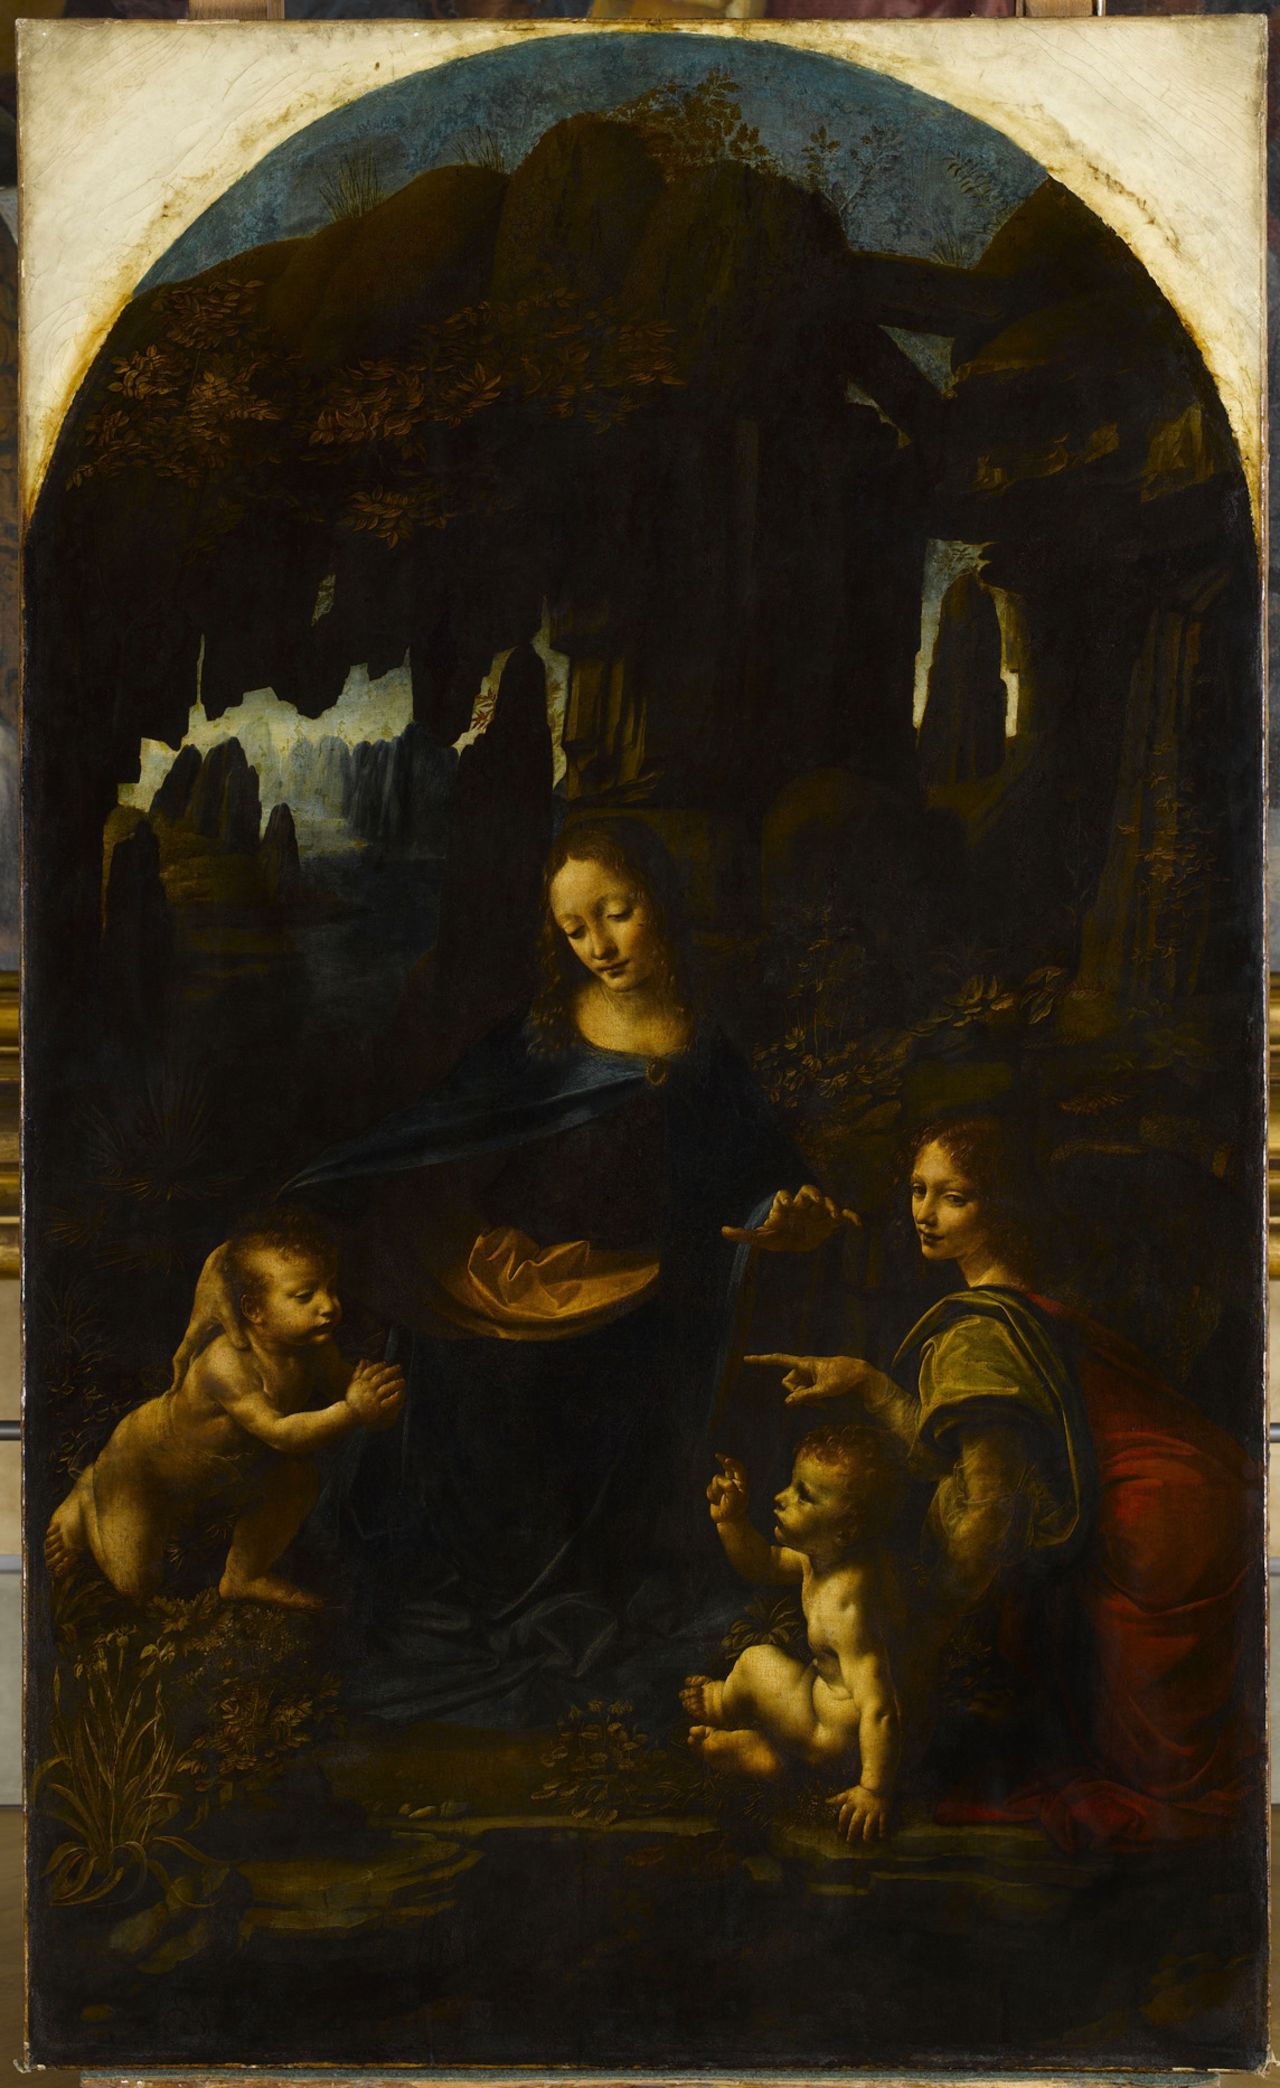 "The Virgin of the Rocks" (c. 1483 -1485). This is the first version of the painting, which normally hangs in the Louvre Museum in Paris. It is being shown for the first time ever opposite the second version of the painting, part of The National Gallery's collection. 